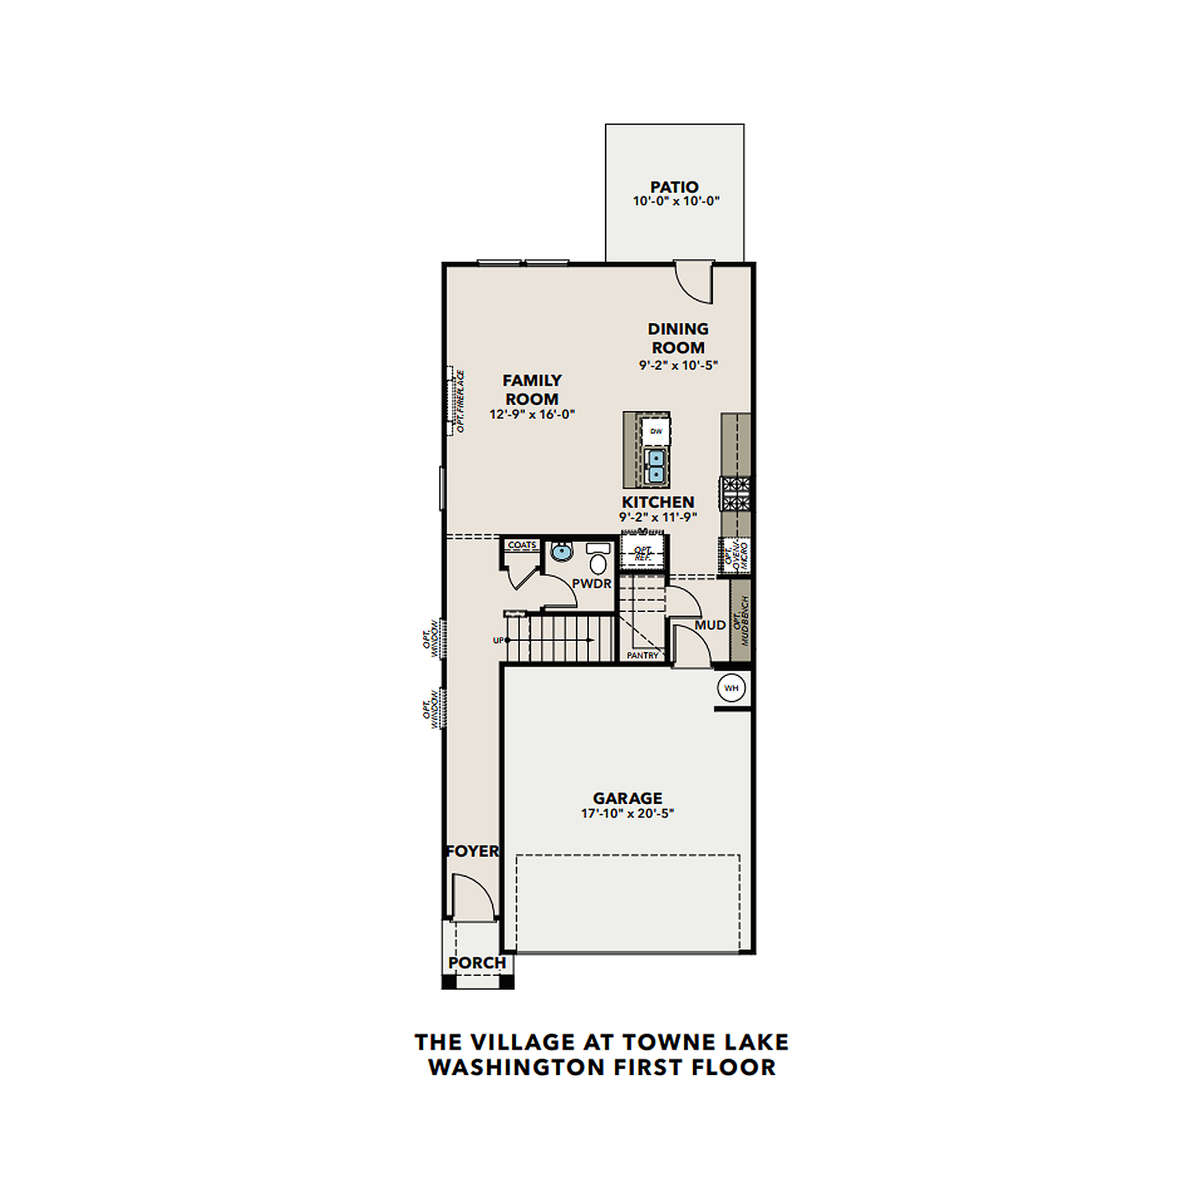 1 - The Washington E buildable floor plan layout in Davidson Homes' The Village at Towne Lake community.